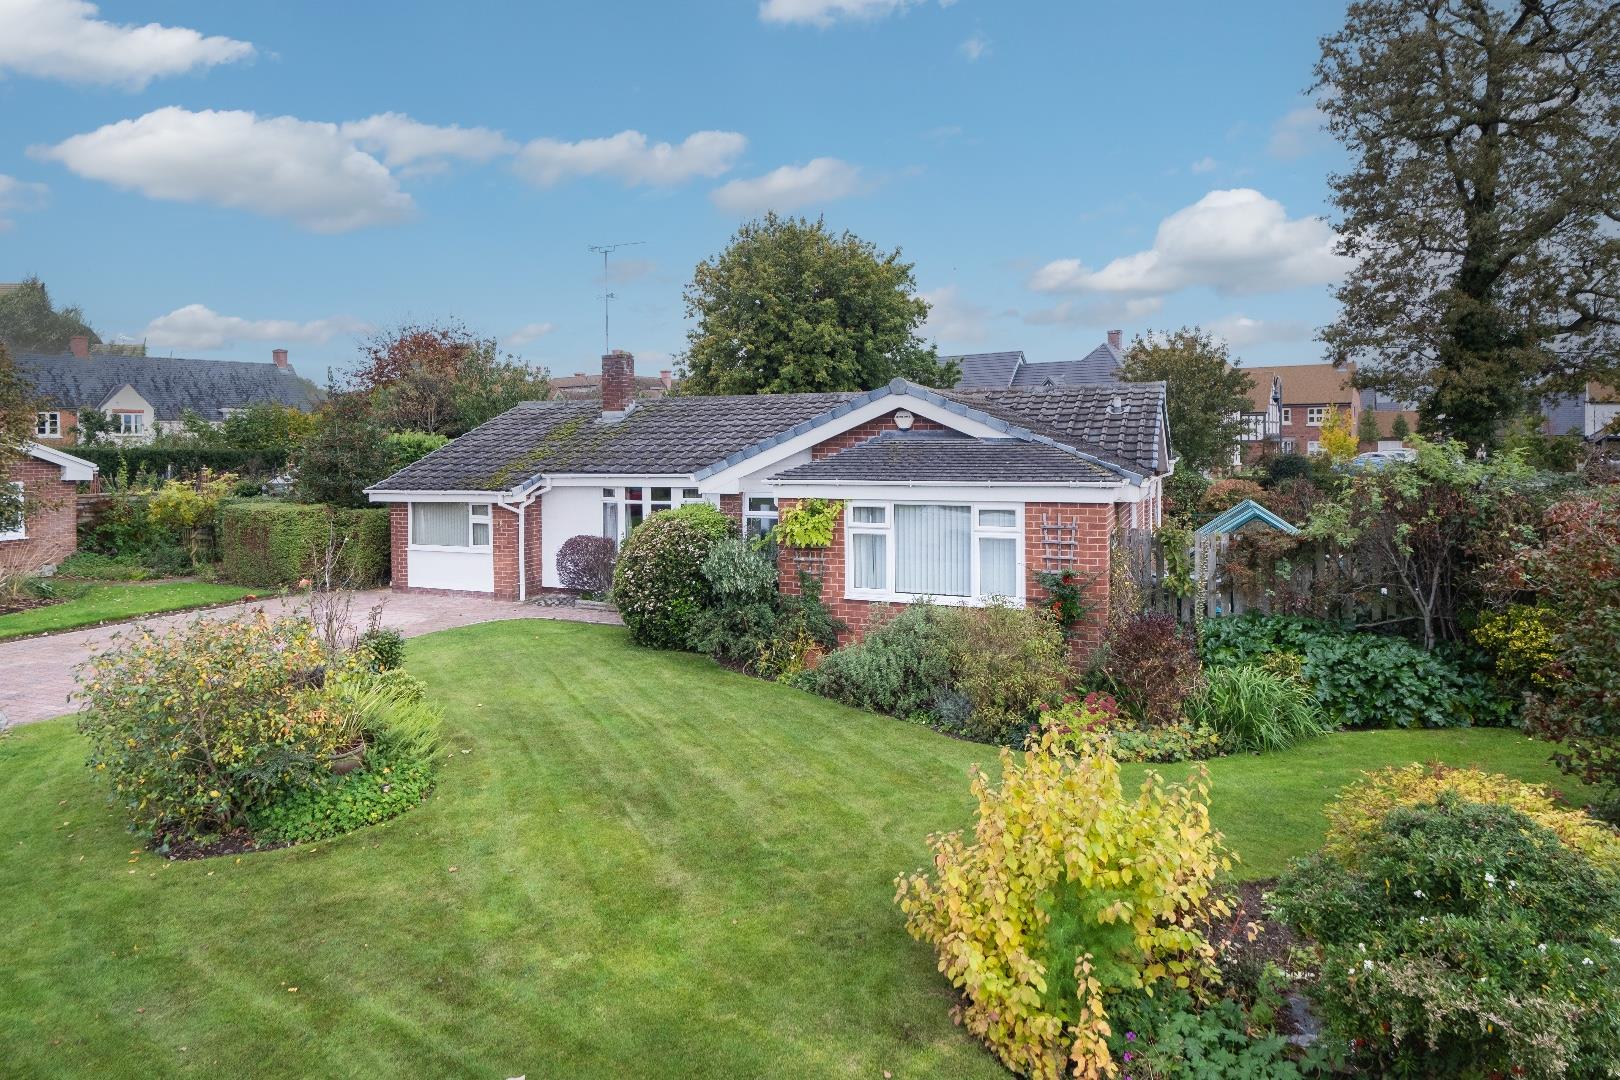 3 bedroom  Detached Bungalow for Sale in Tattenhall